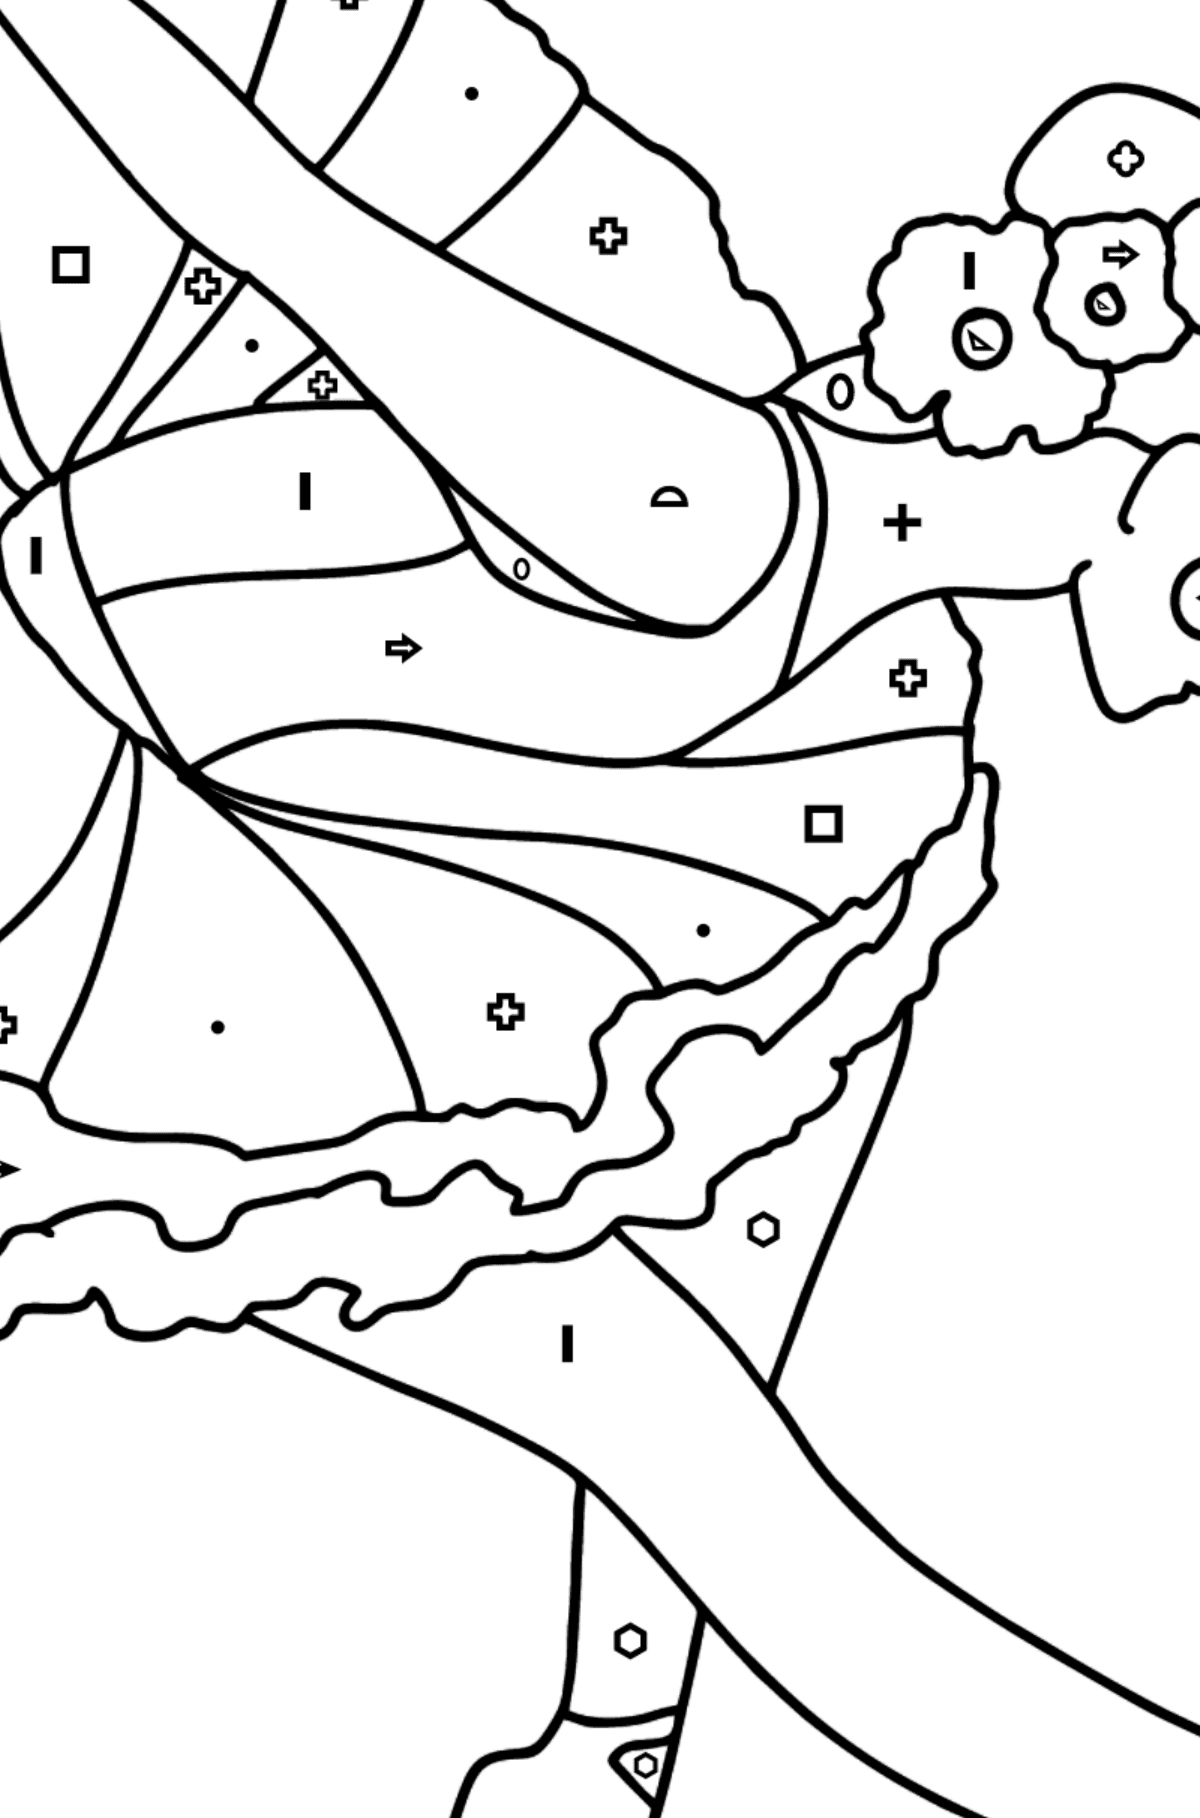 Ballerina Bowing coloring page - Coloring by Symbols and Geometric Shapes for Kids